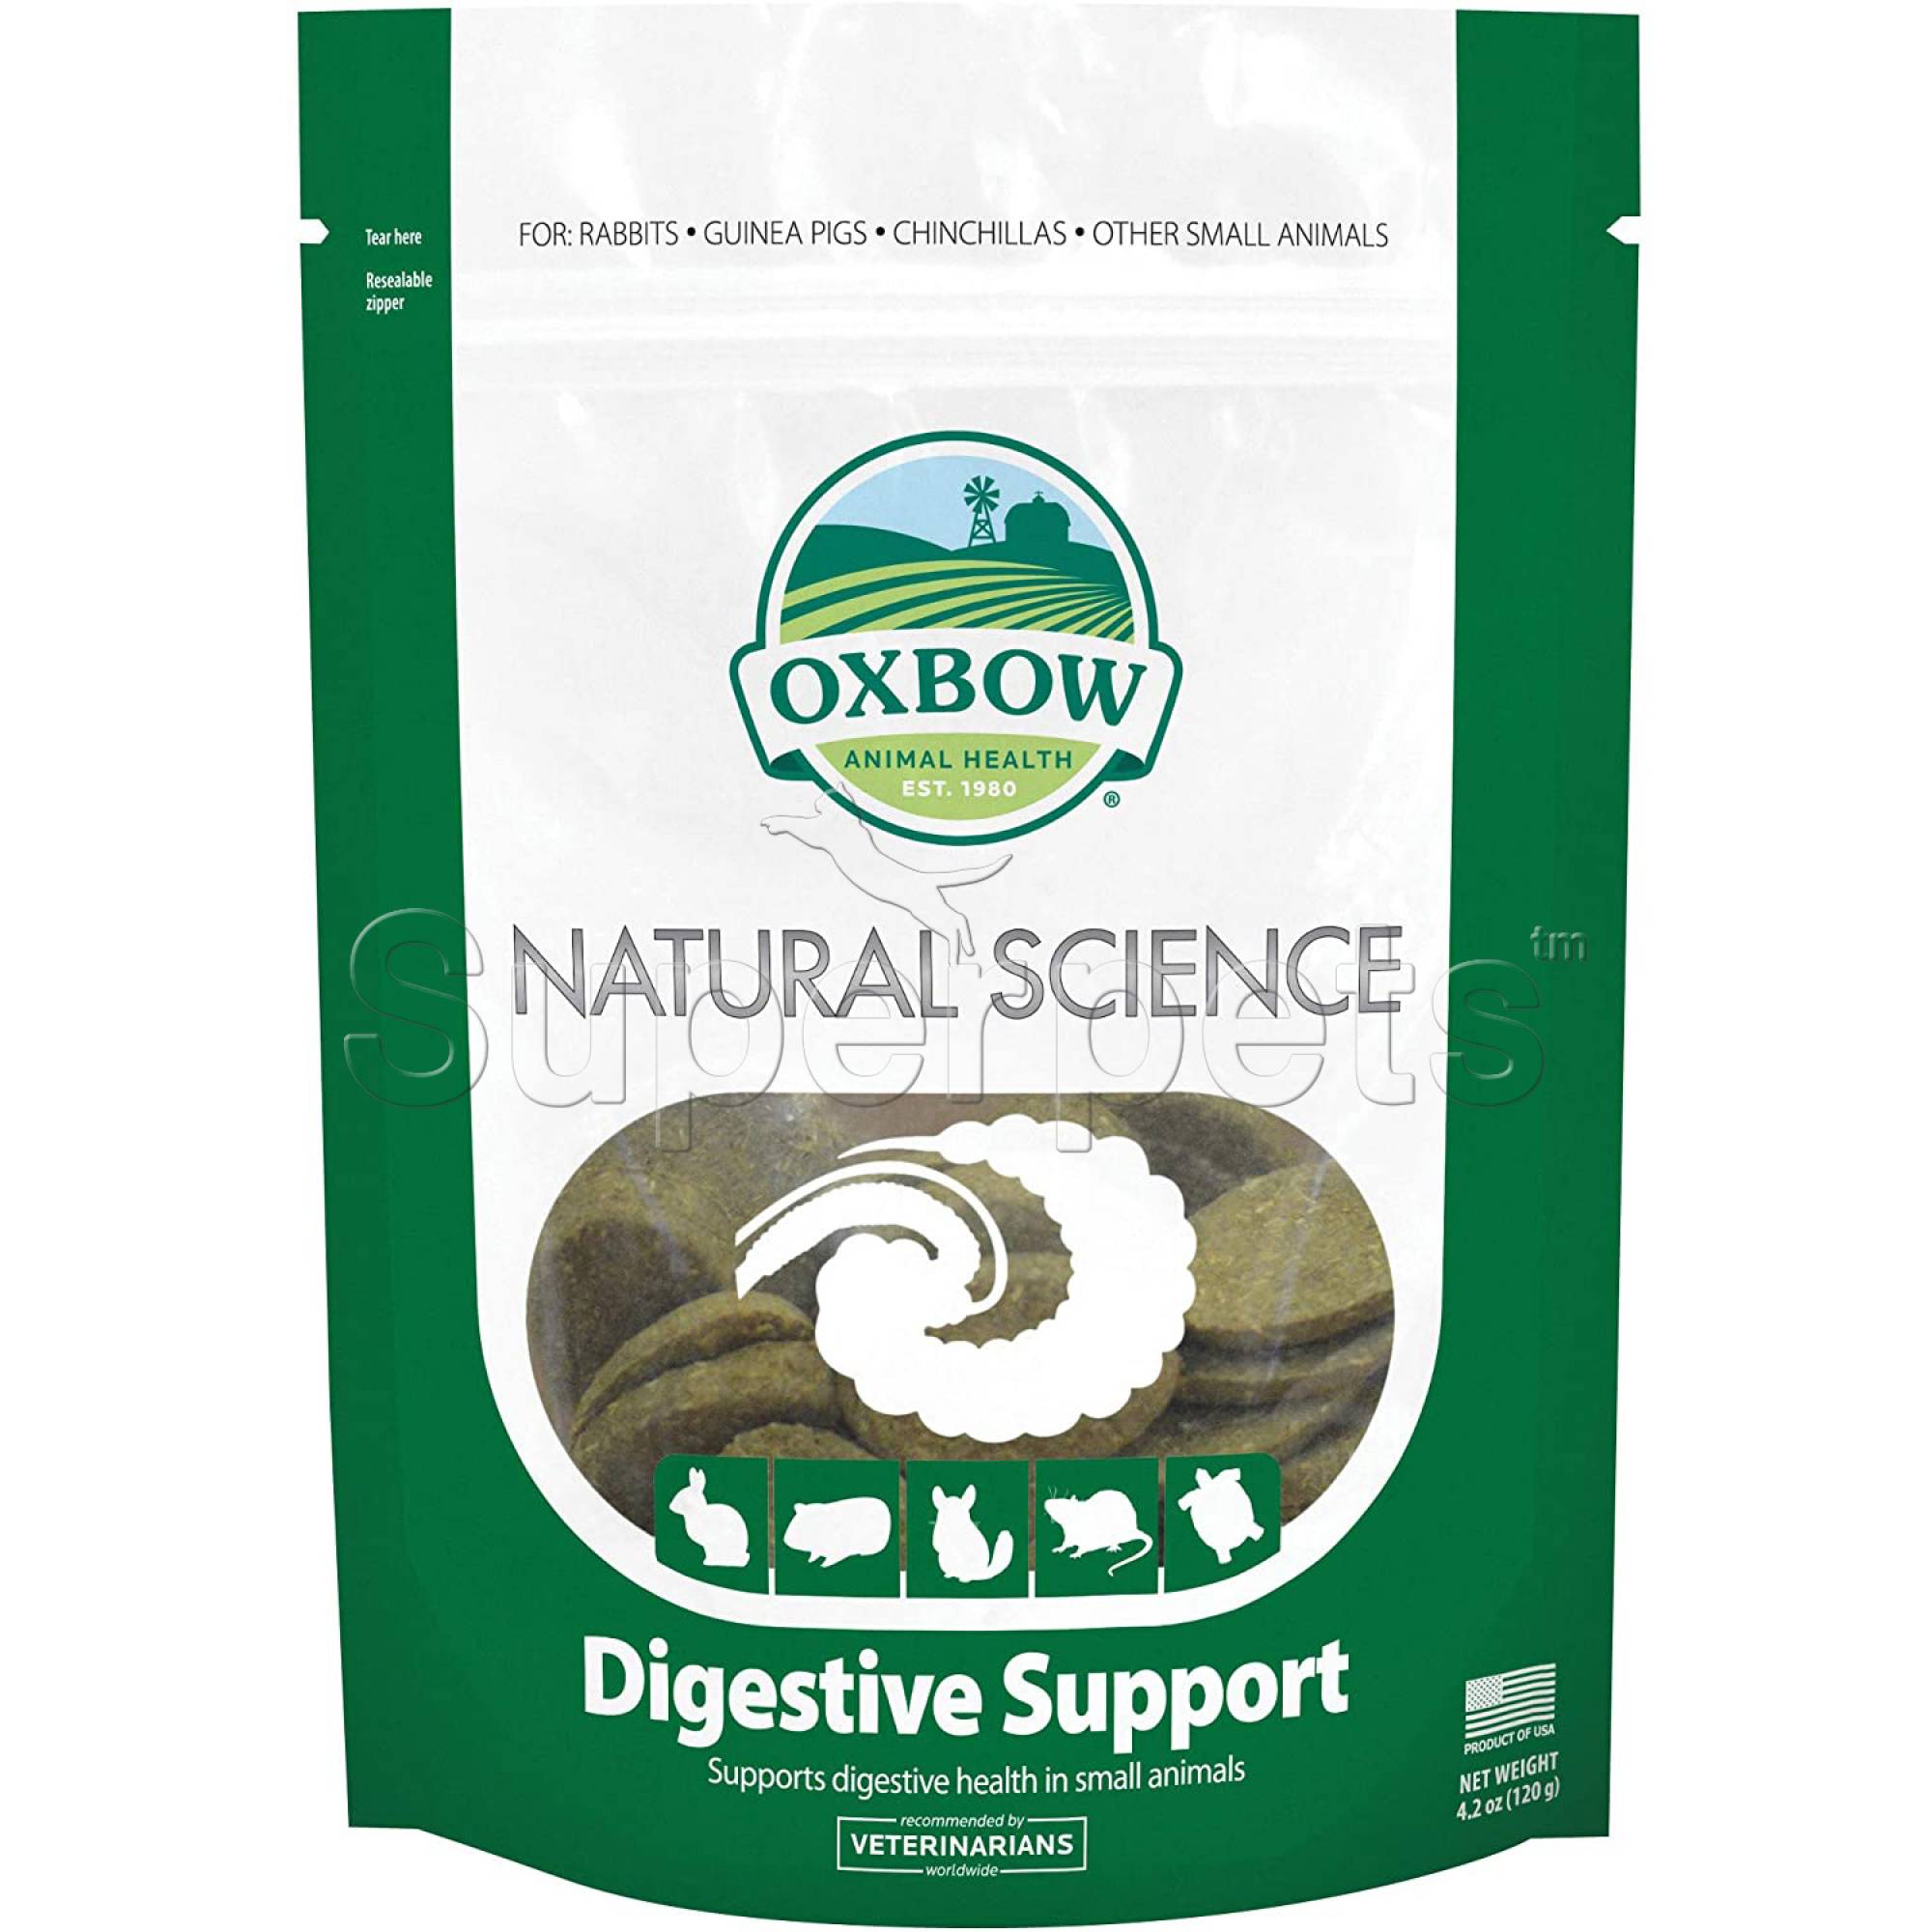 Oxbow Natural Science Digestive Support 4.2oz (120g)